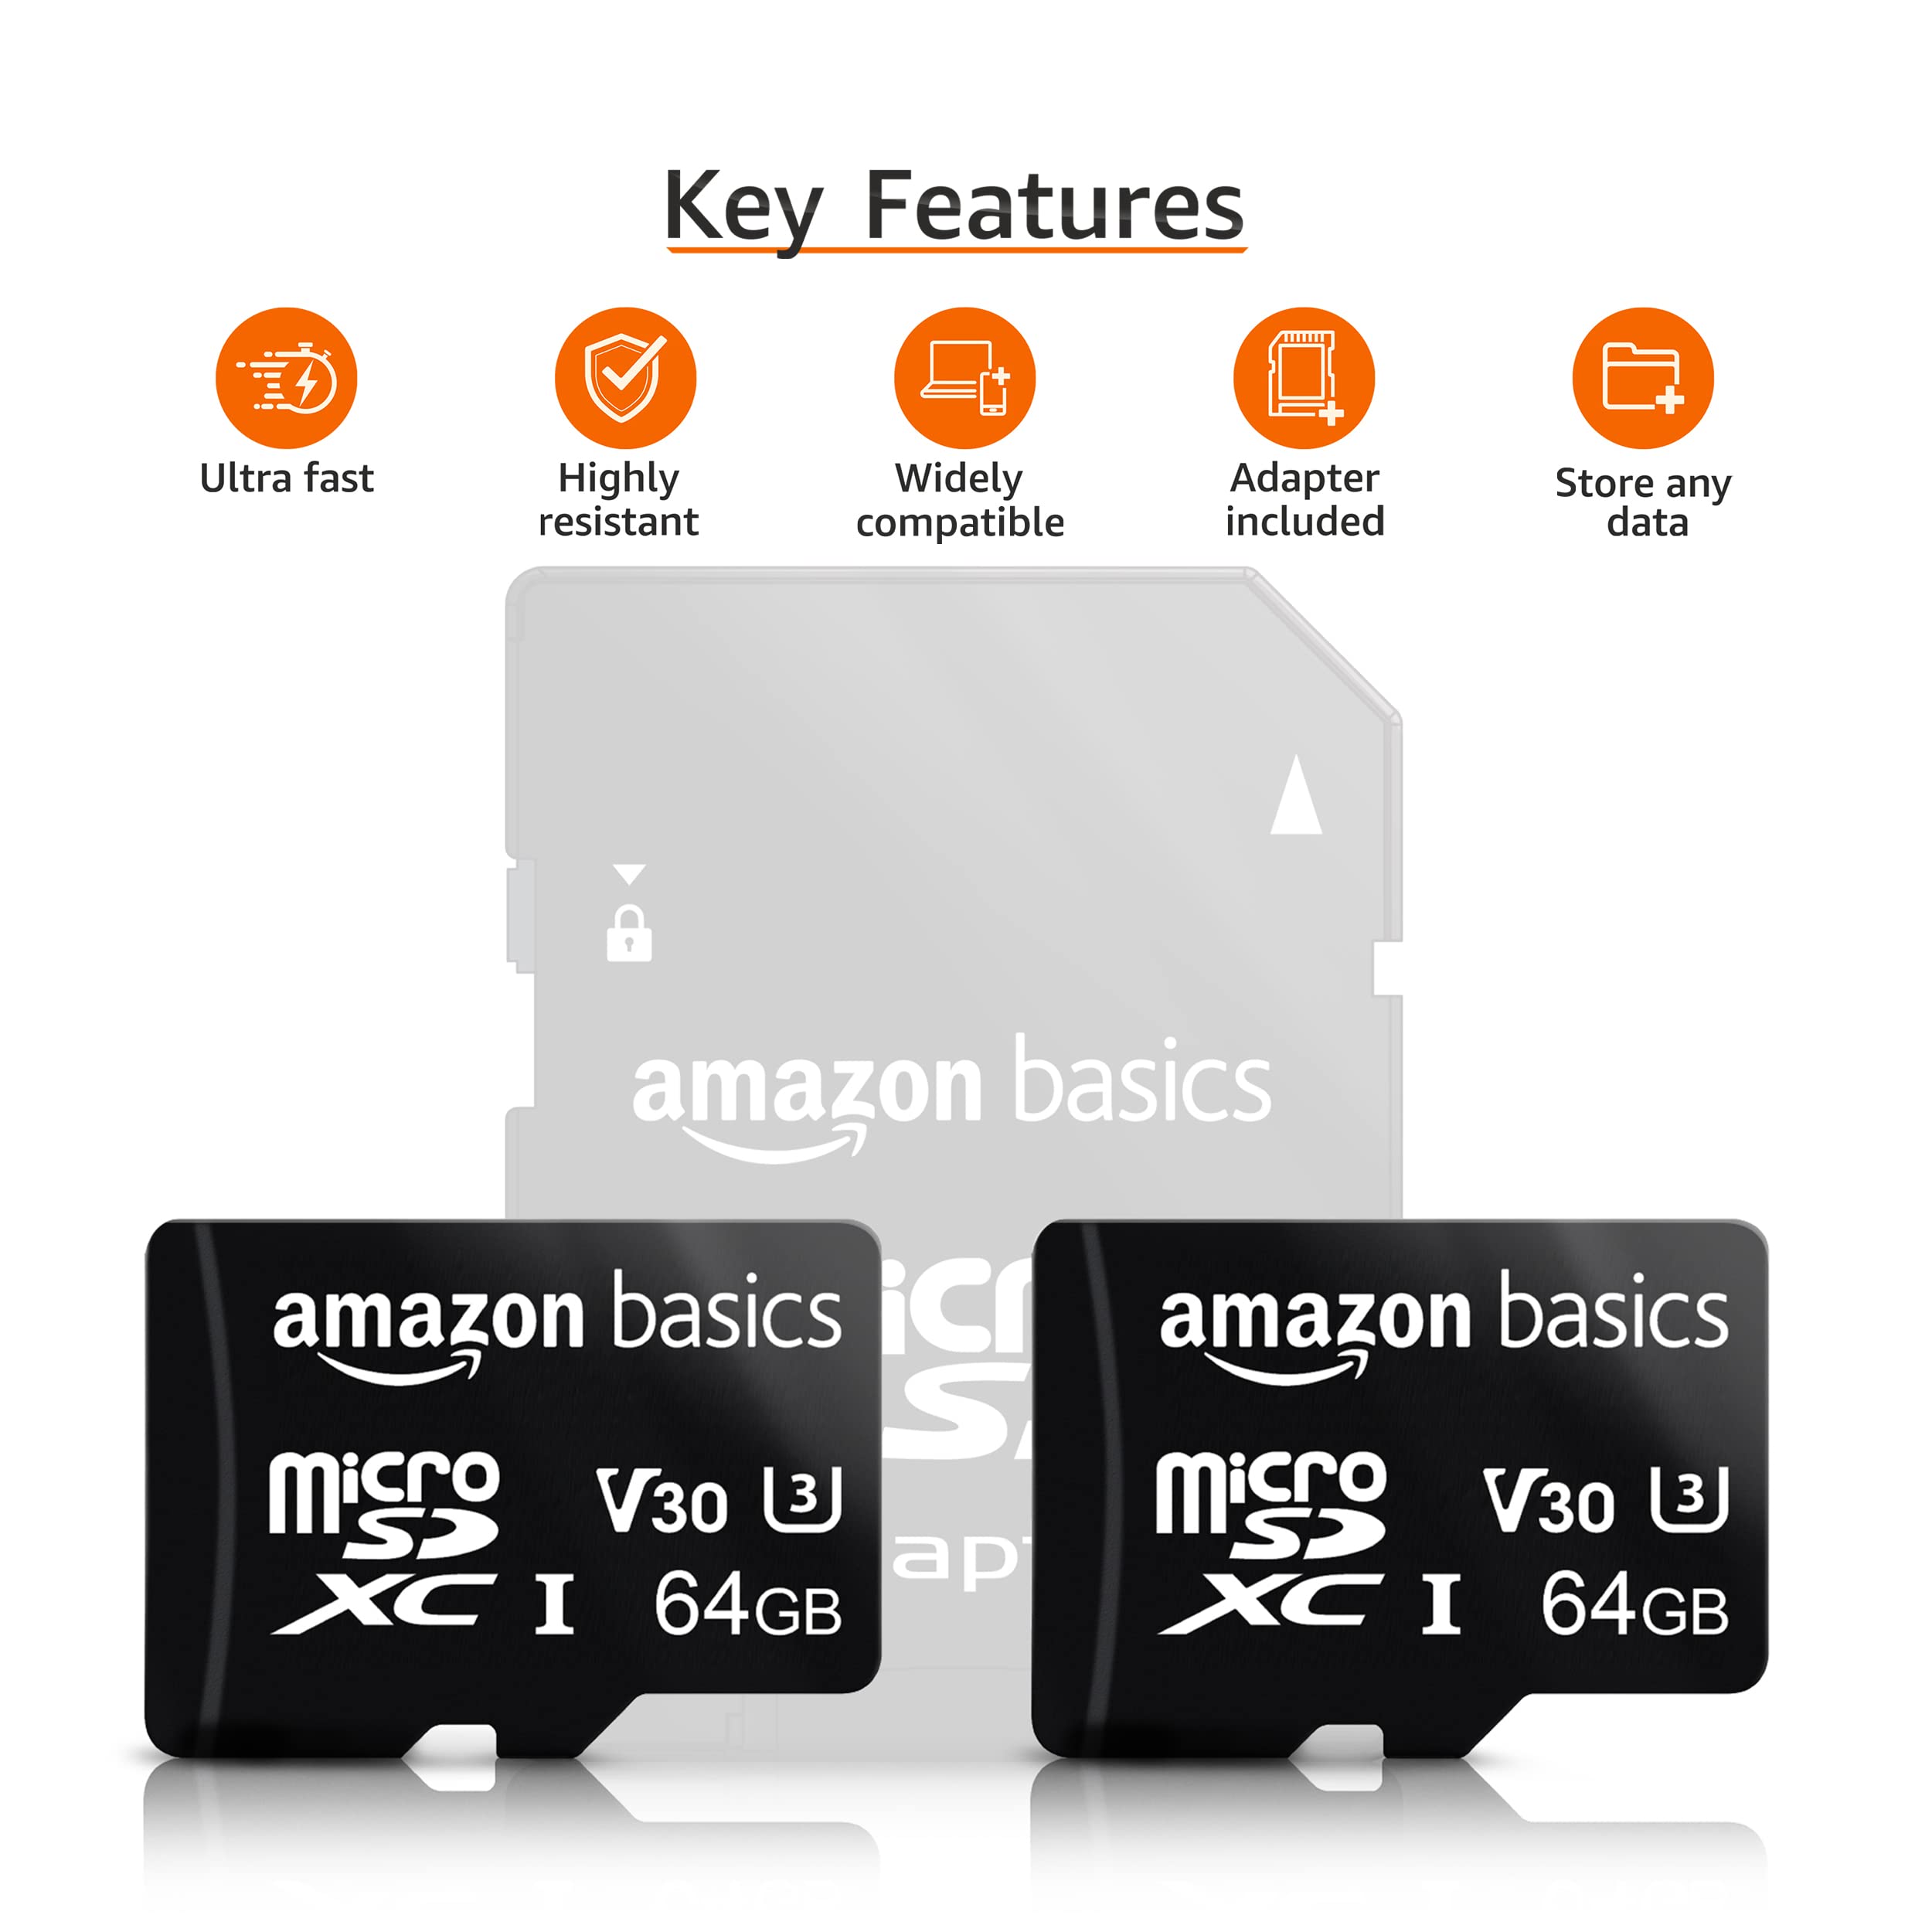 Amazon Basics microSDXC Memory Card with Full Size Adapter, A2, U3, Read Speed up to 100 MB/s, 64 GB, Pack of 2, Black